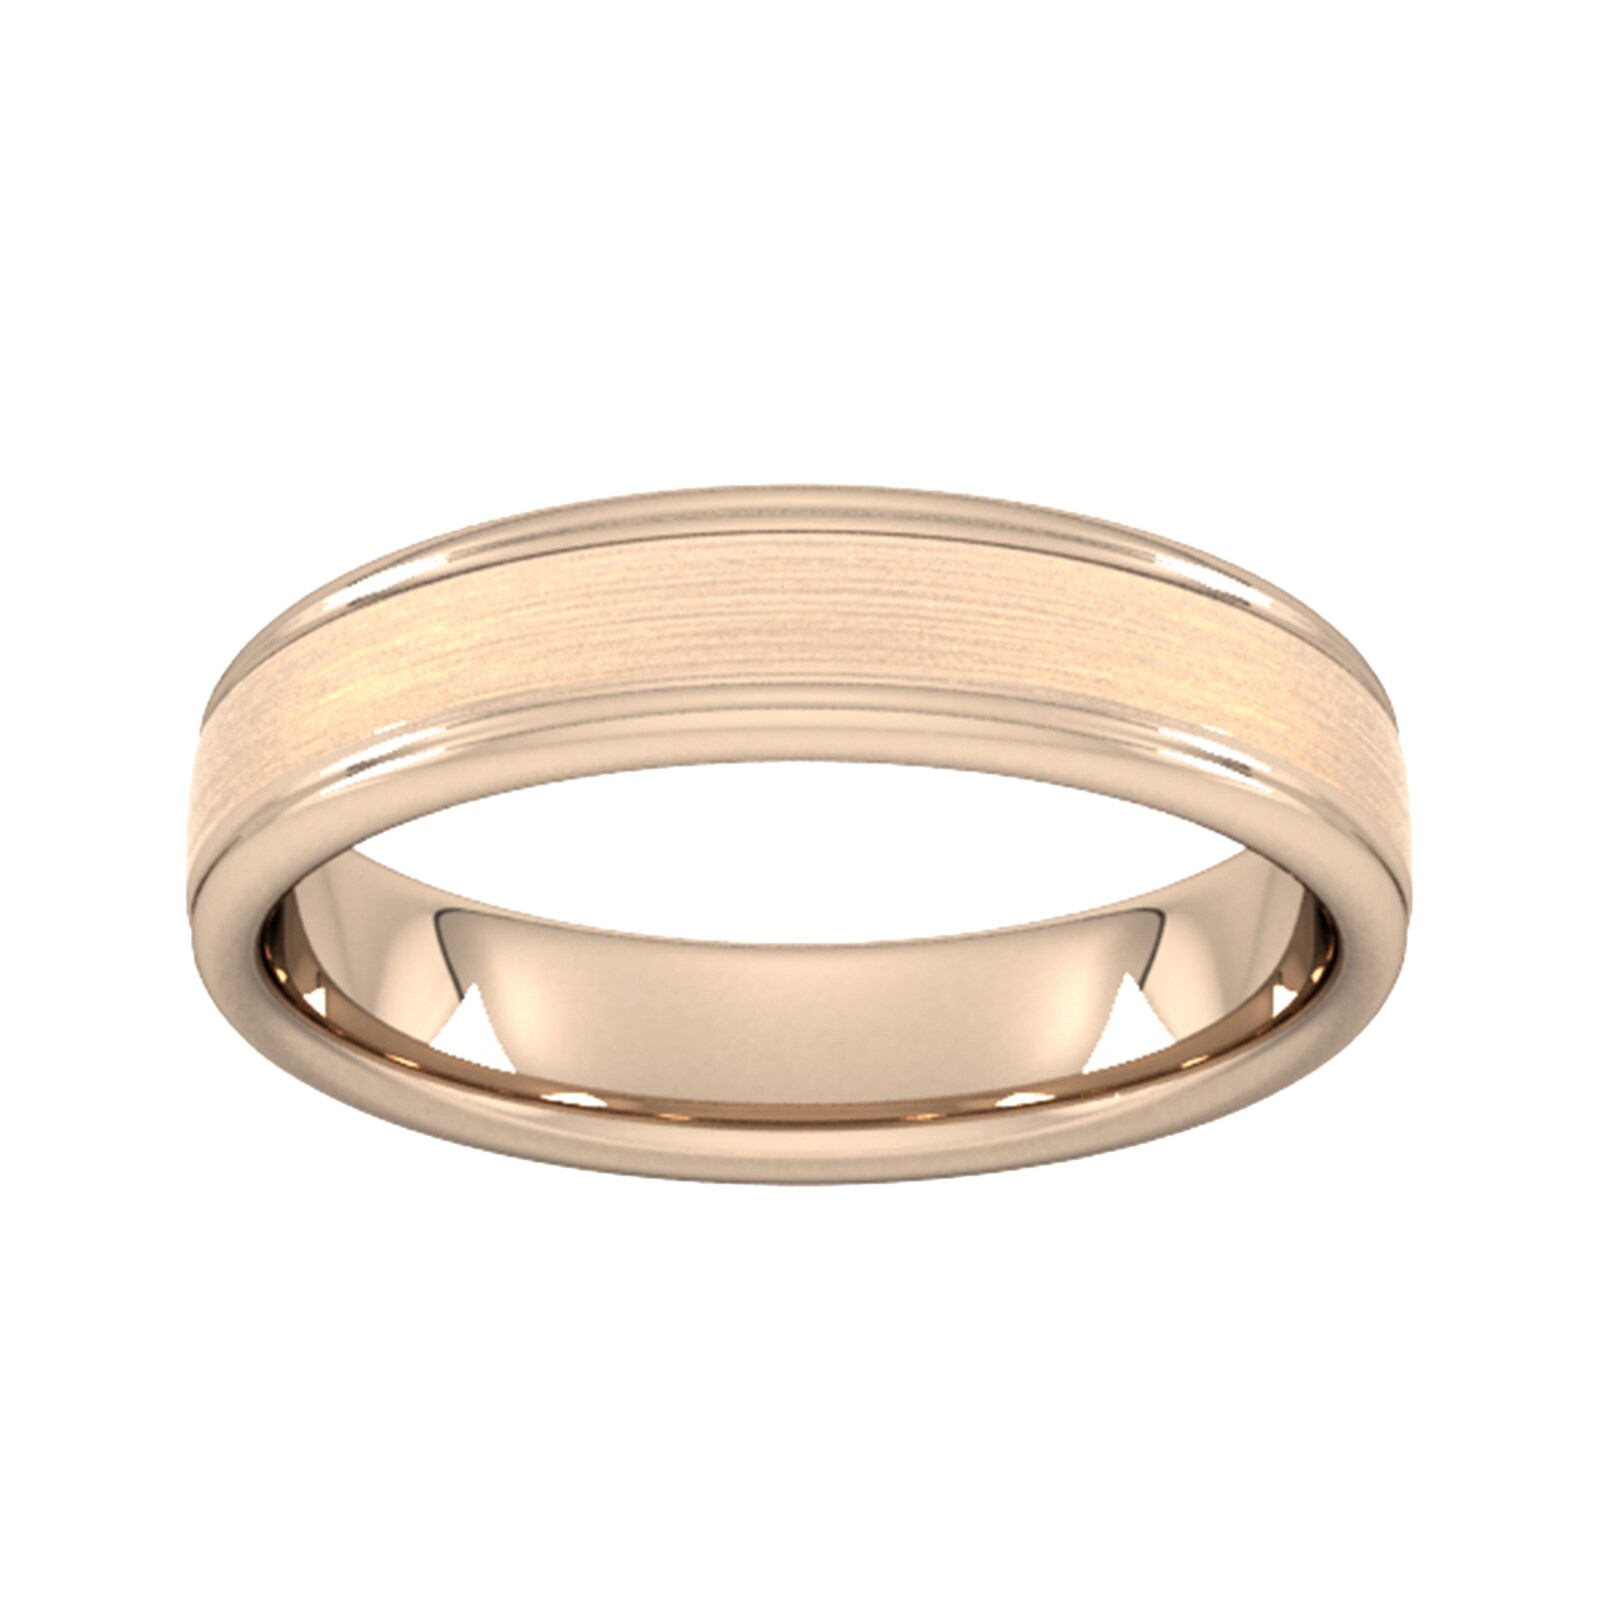 5mm Slight Court Standard Matt Centre With Grooves Wedding Ring In 9 Carat Rose Gold - Ring Size T